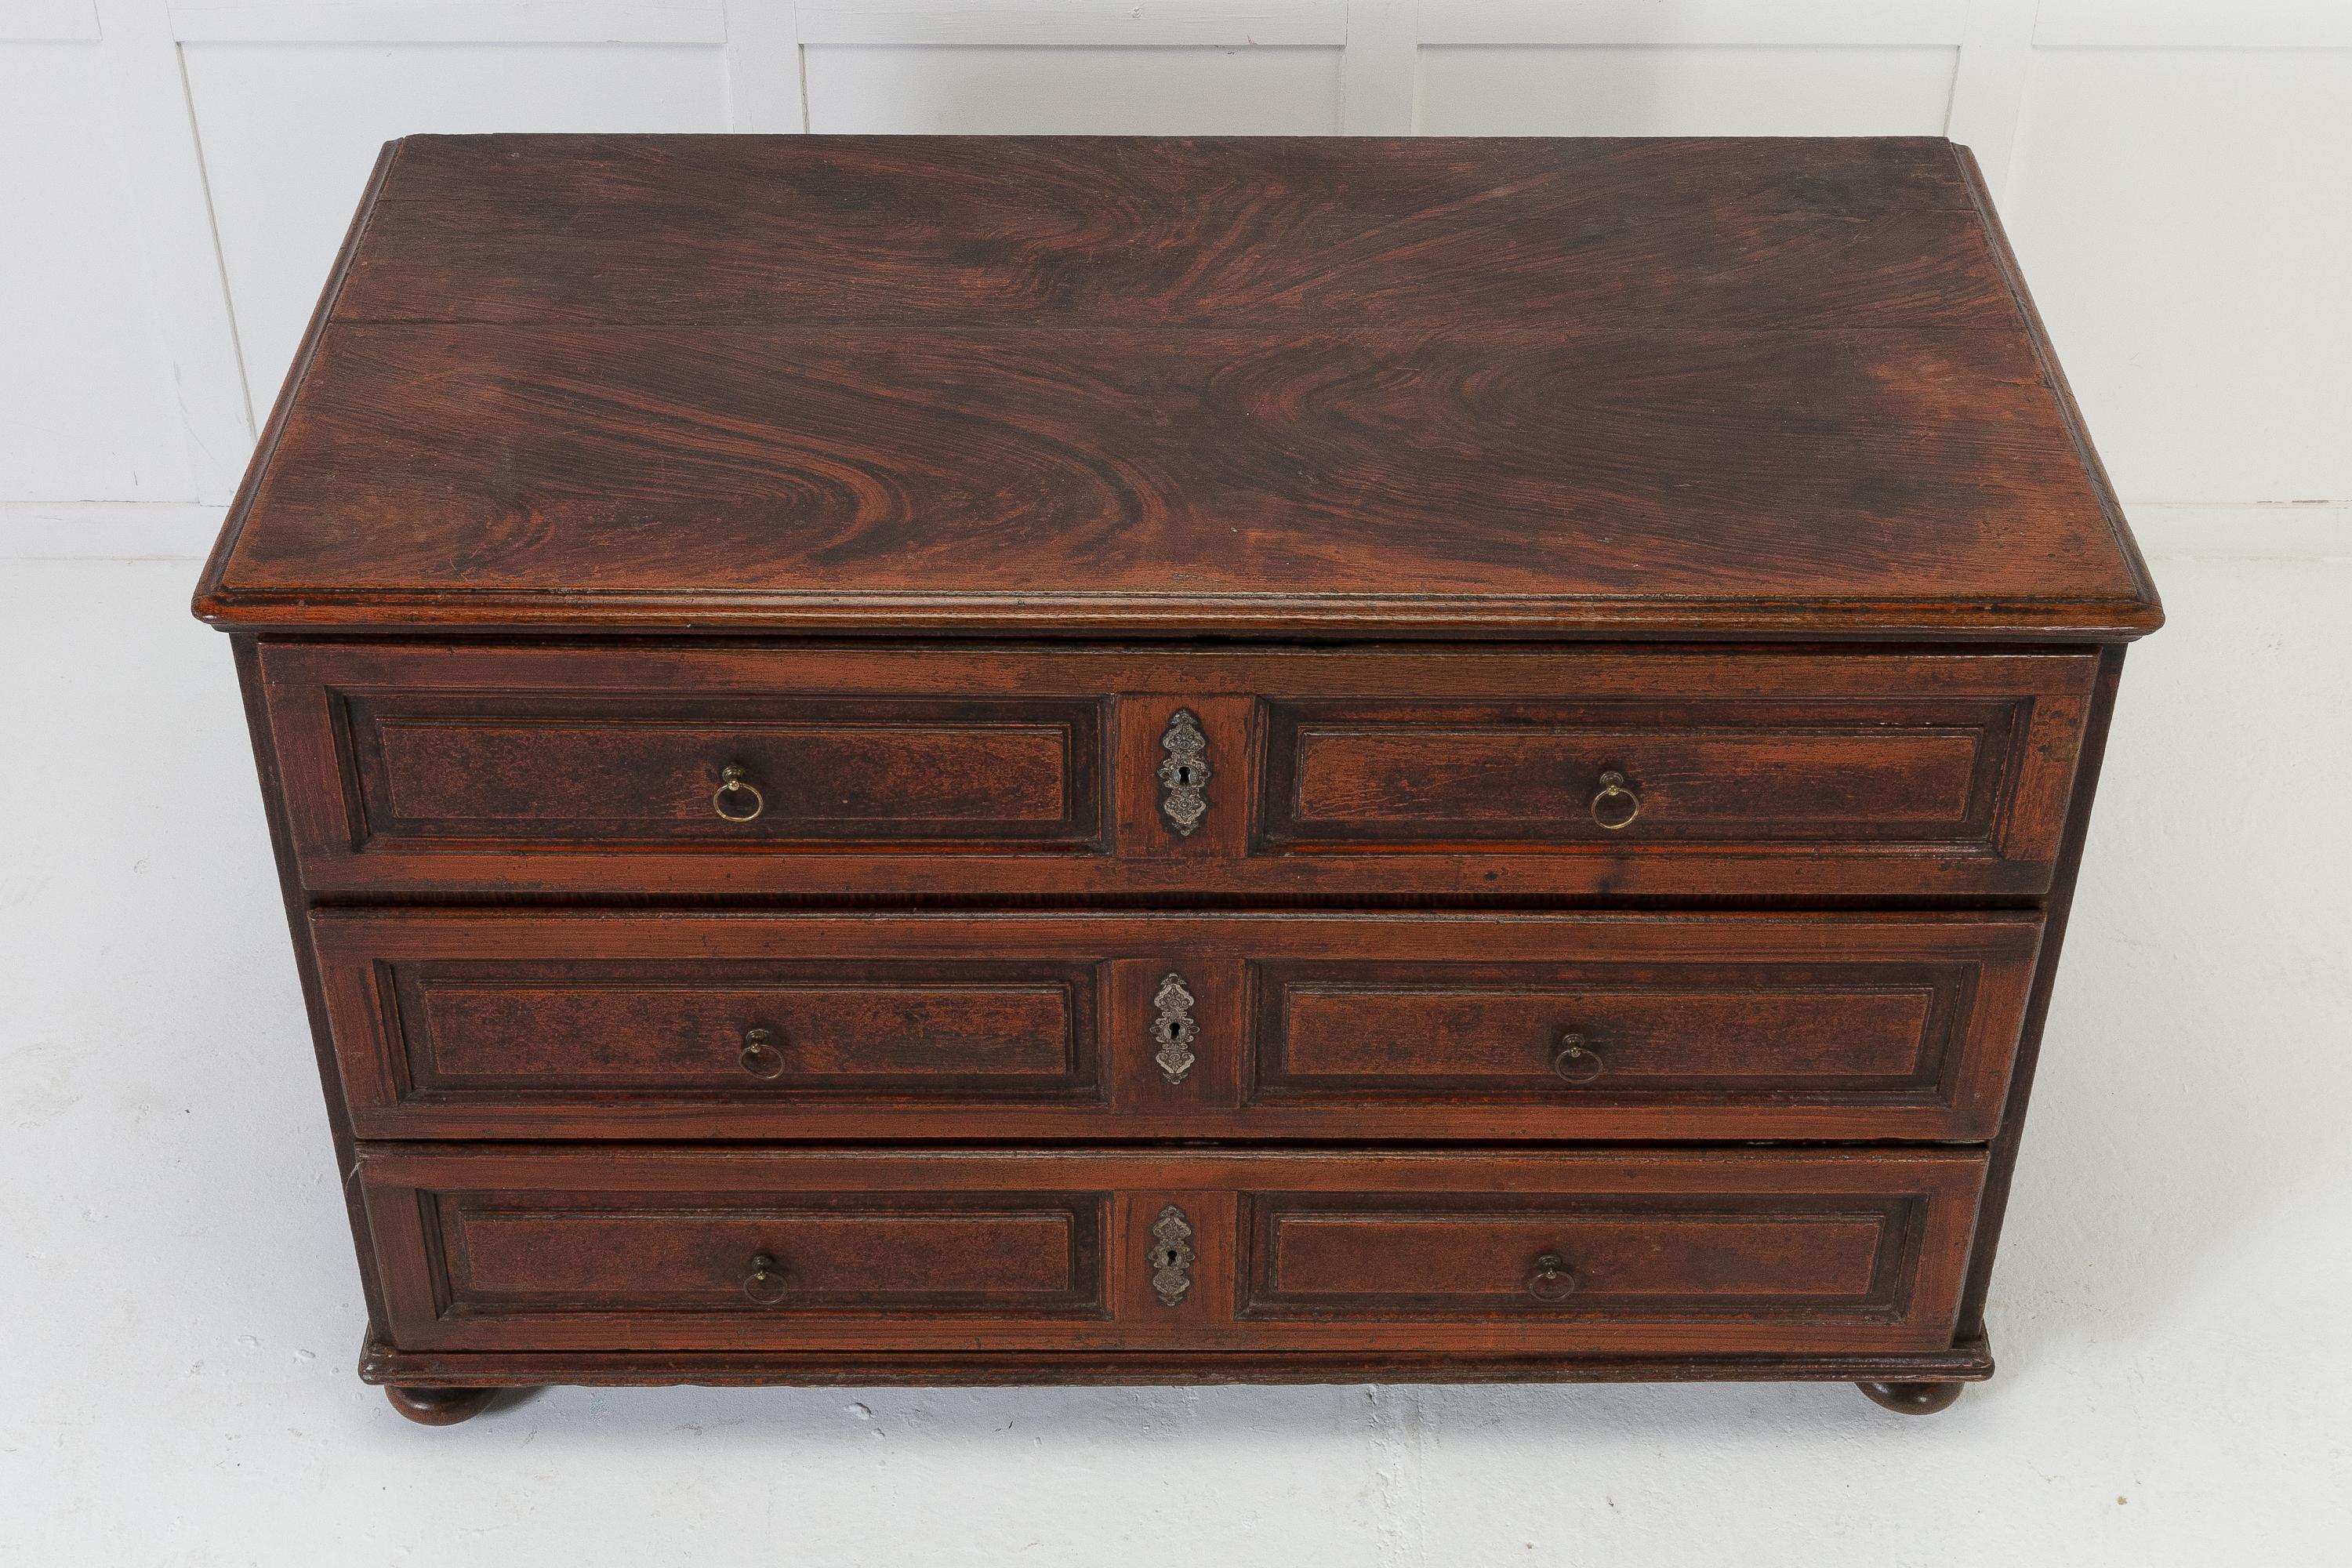 18th century three drawer commode with its original faux wood paint. The drawer fronts are finished with panels, original ring pull handles and escutcheons. The sides are panelled and it stands on squashed bun feet at the front and square tapering